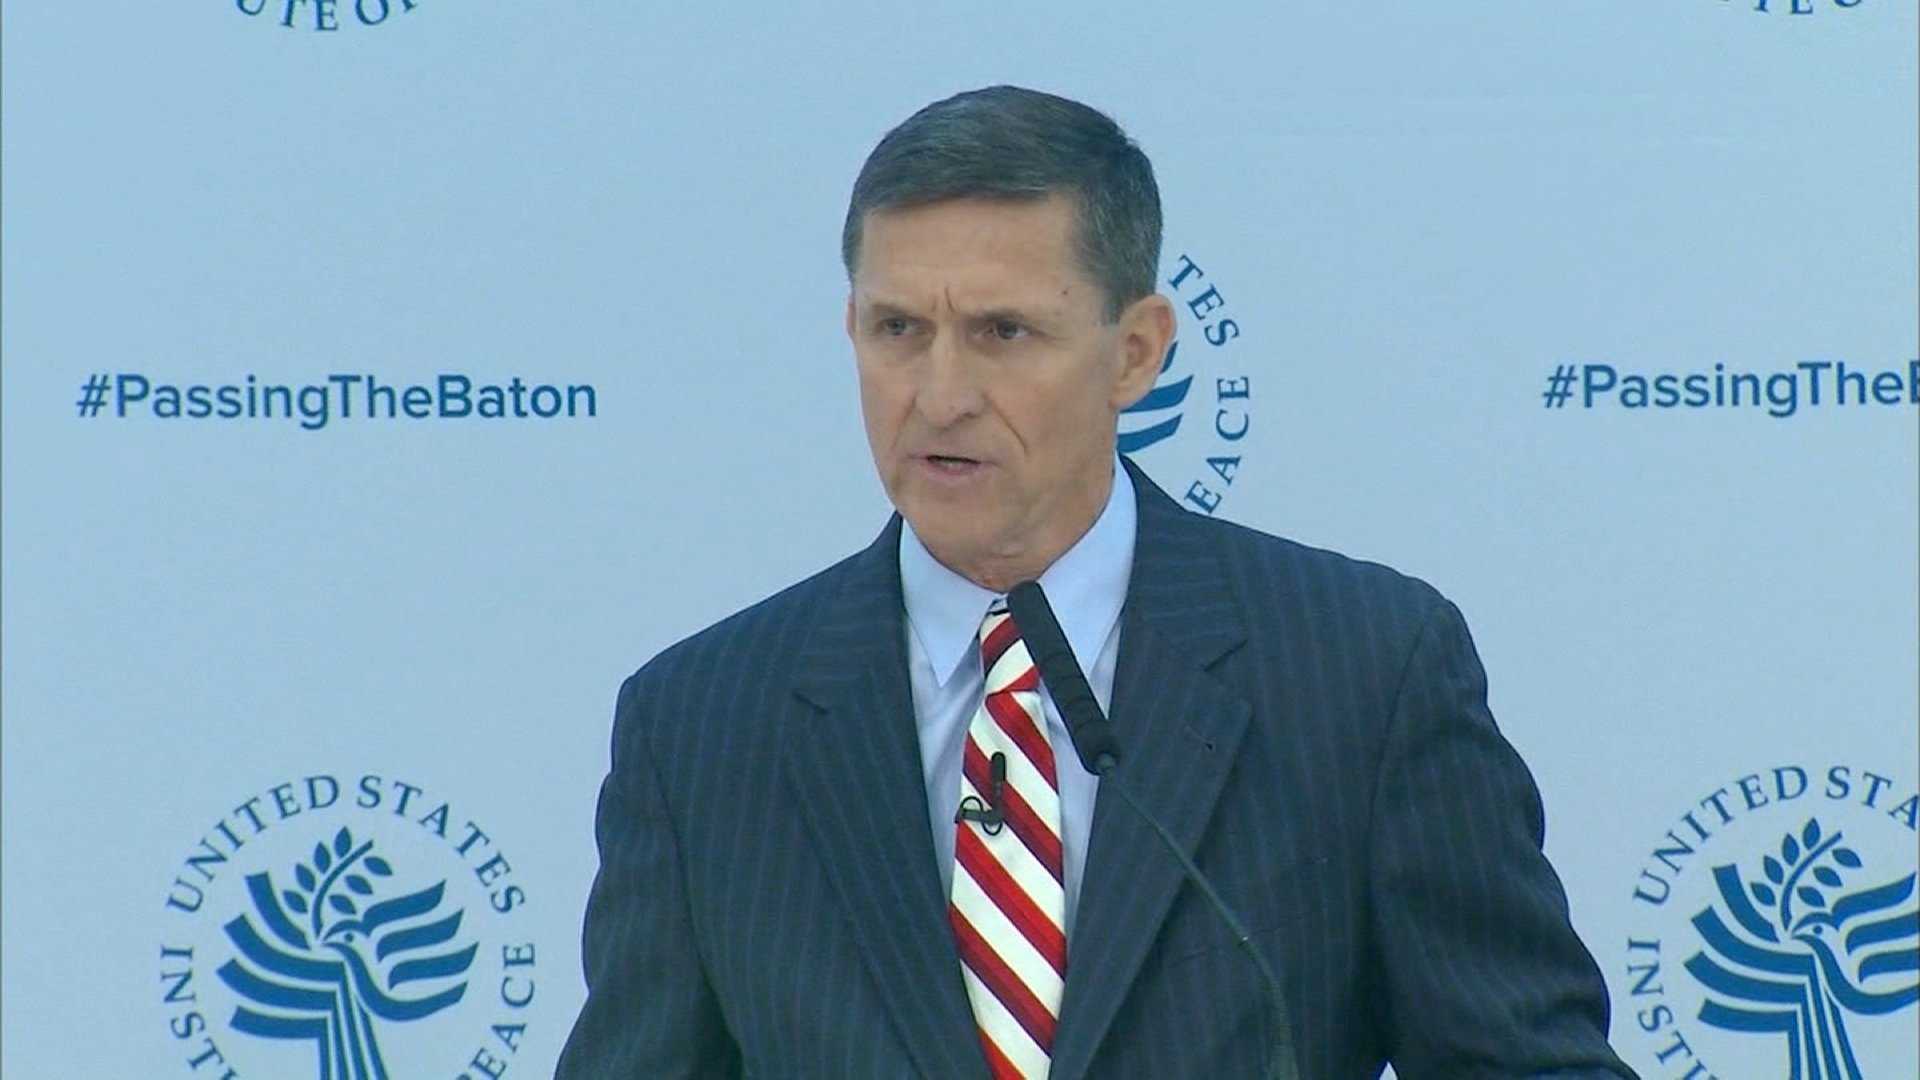 Top House Dem: Documents show Flynn made false statements to investigators